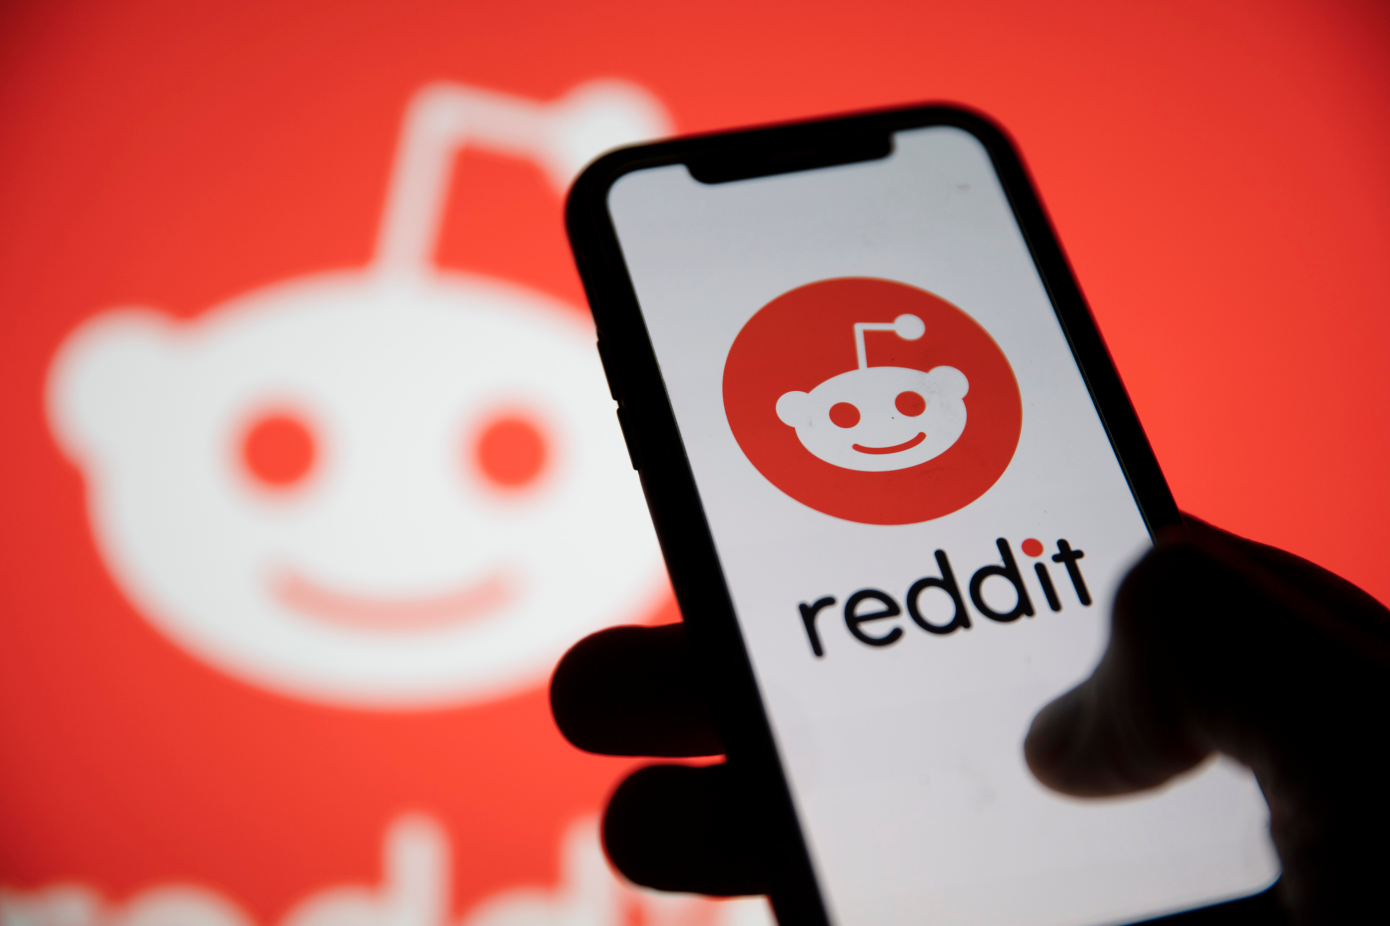 Reddit Down, Over 60,000 Outage Reported